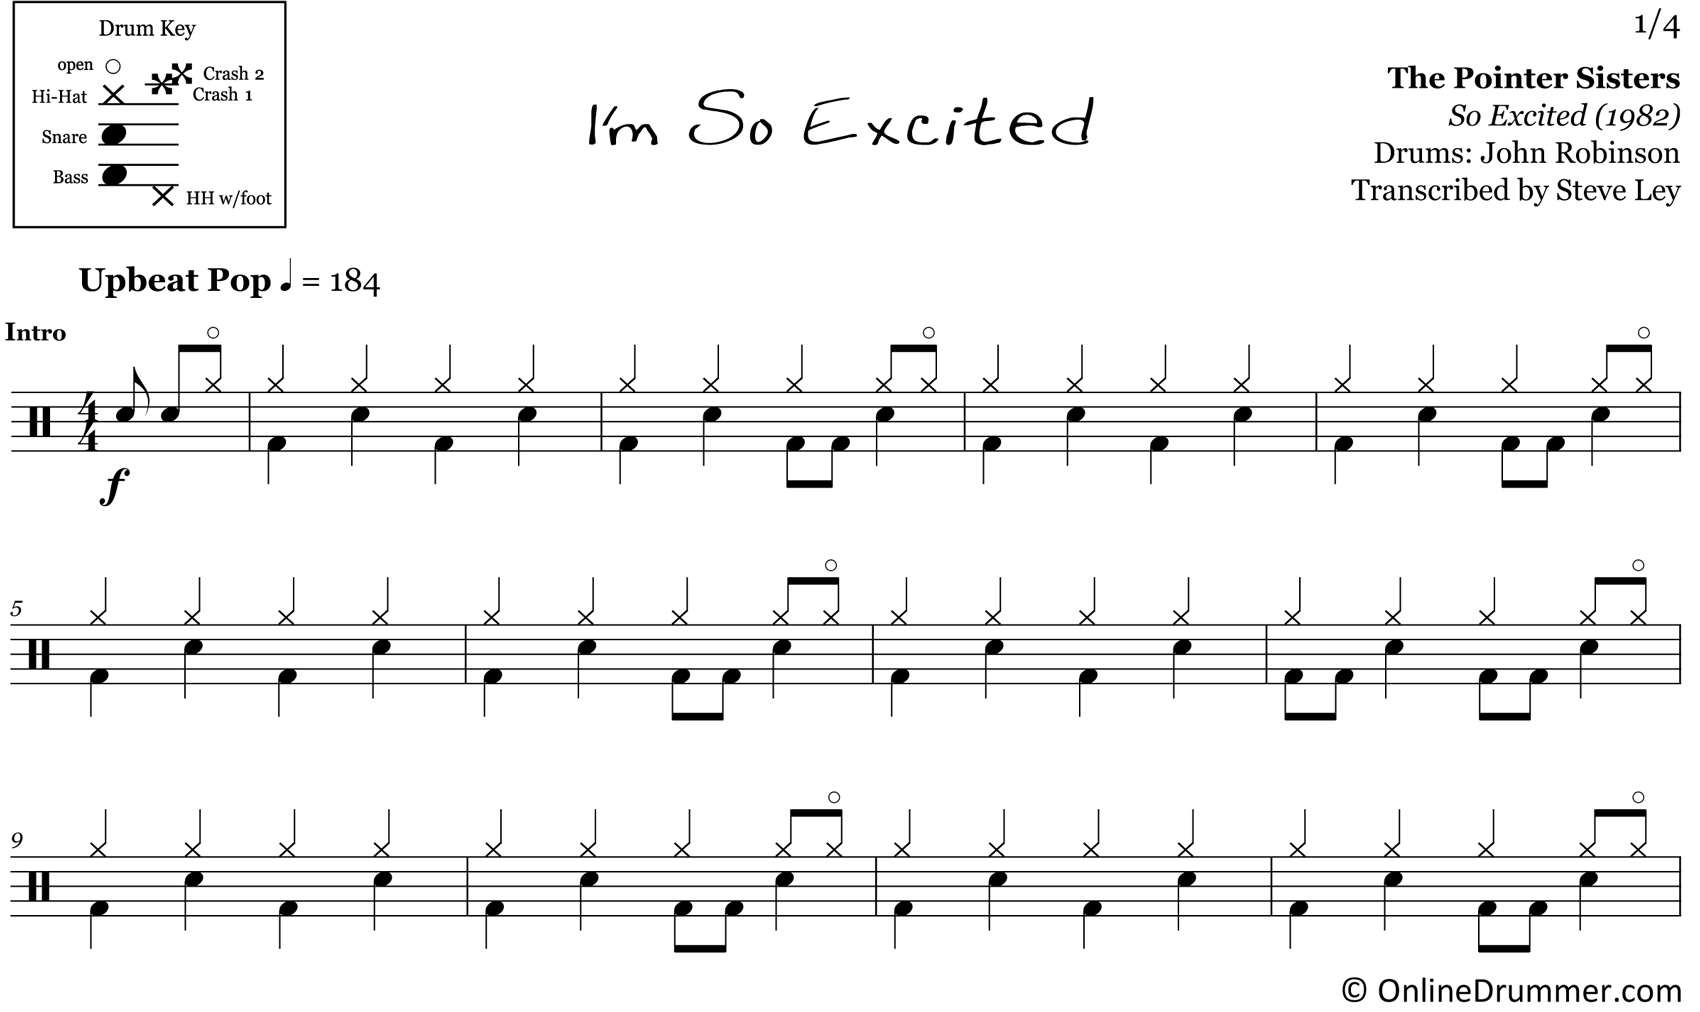 I'm So Excited - The Pointer Sisters - Drum Sheet Music